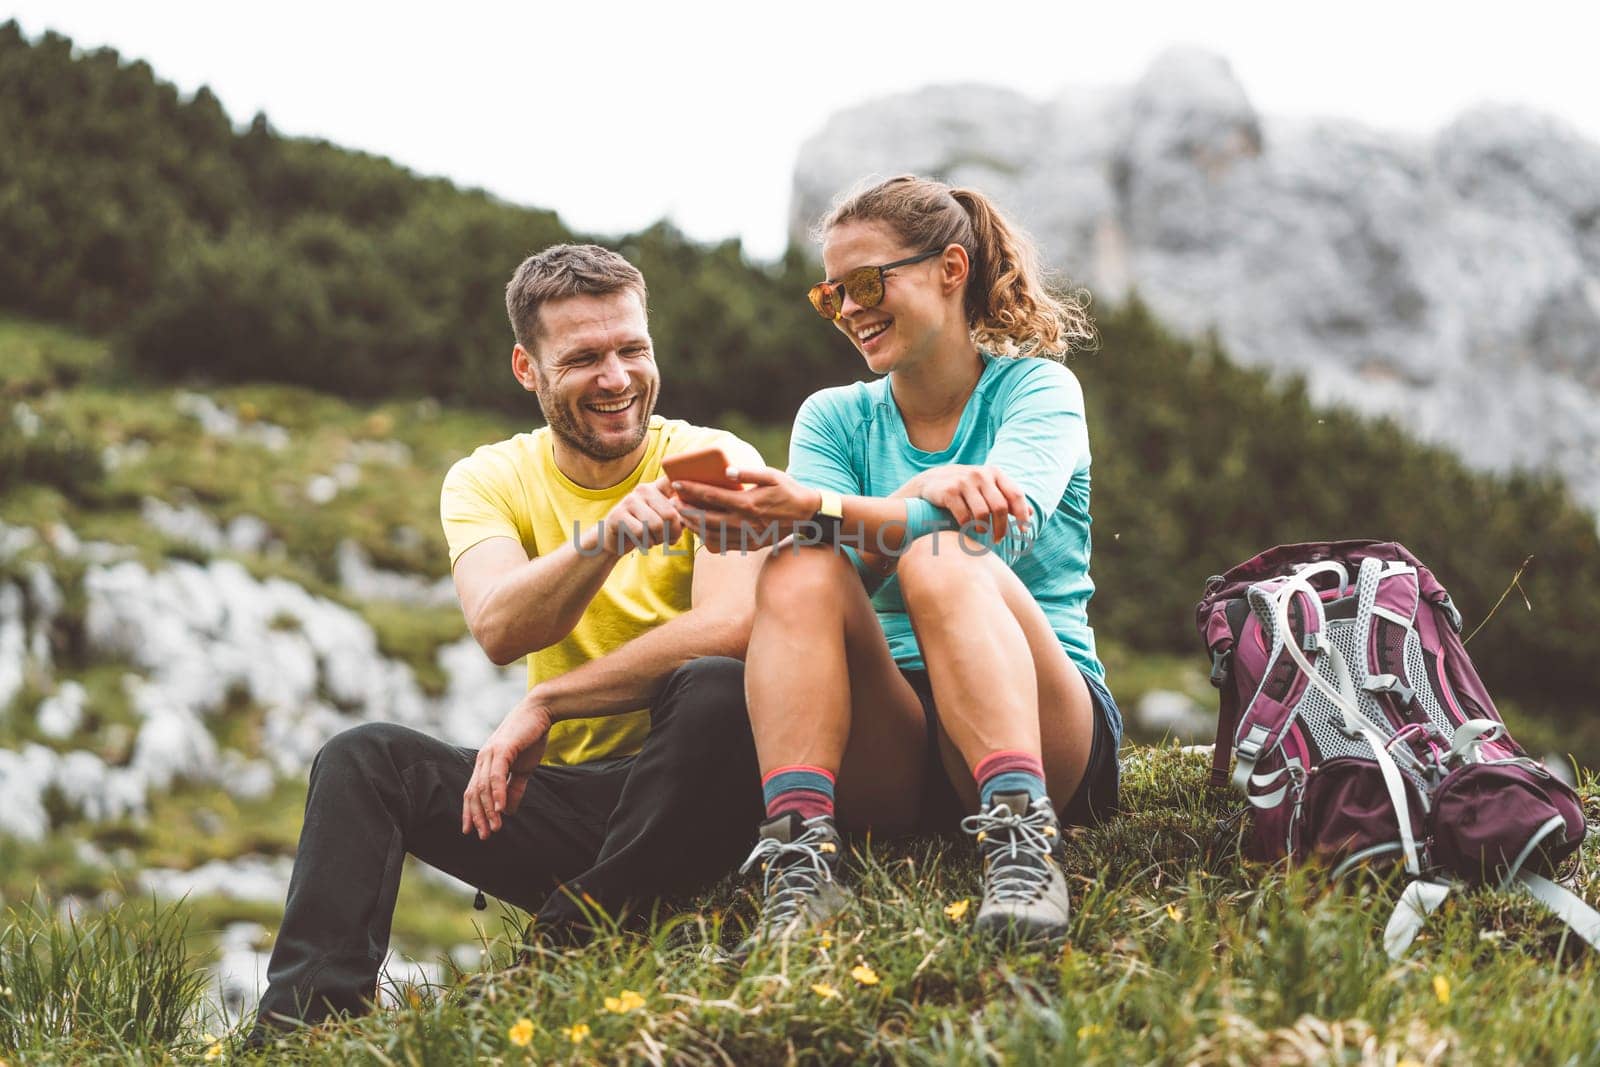 Smiling couple of hikers sitting down on the grass laughing while looking at the phone by VisualProductions